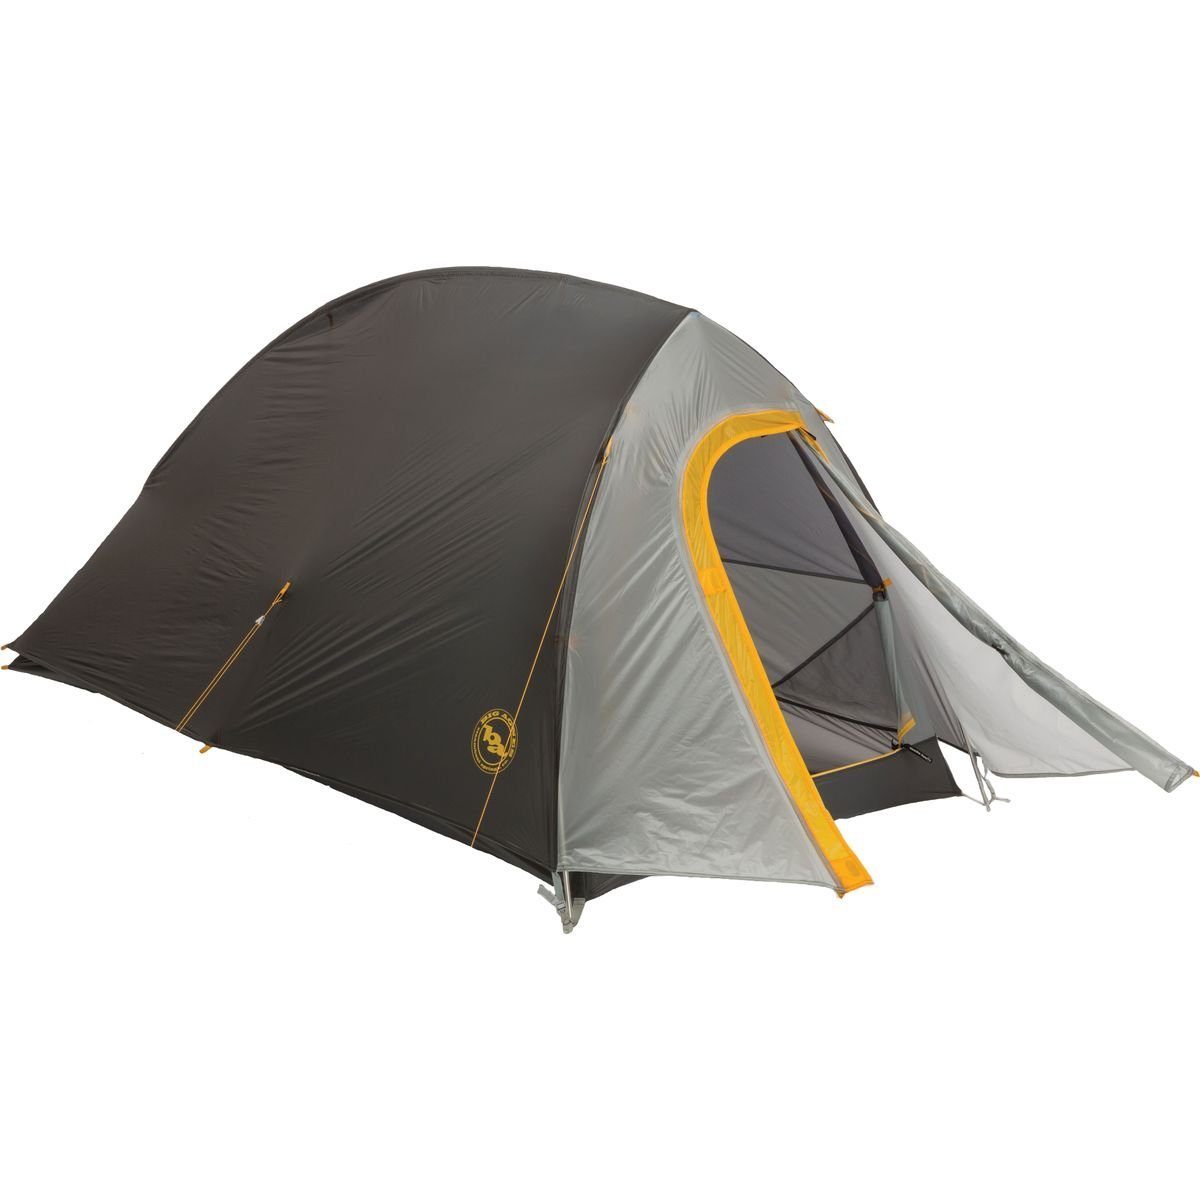 Anthony Galluscio Hiking Gear Review #5: Backpacking Tent